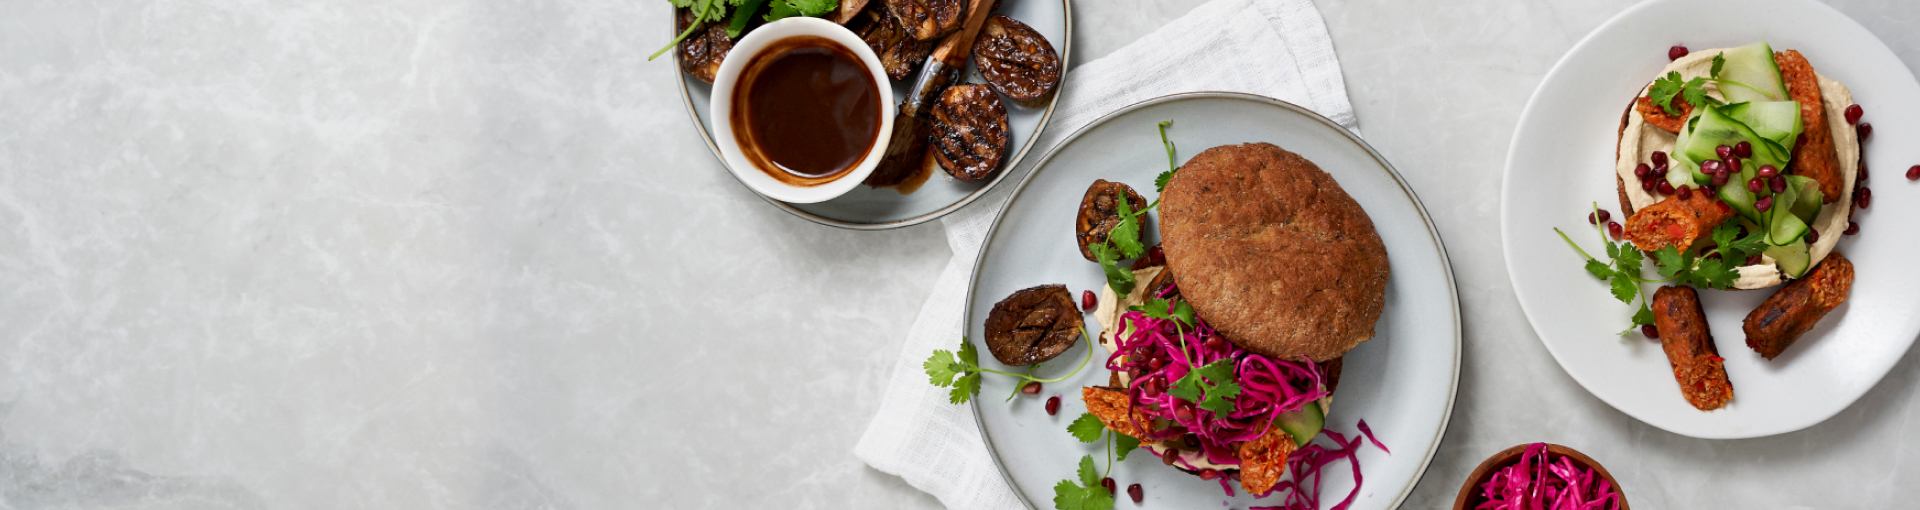 Flame-Grilled Aubergine Pita with Hummus & Pickled Red Cabbage